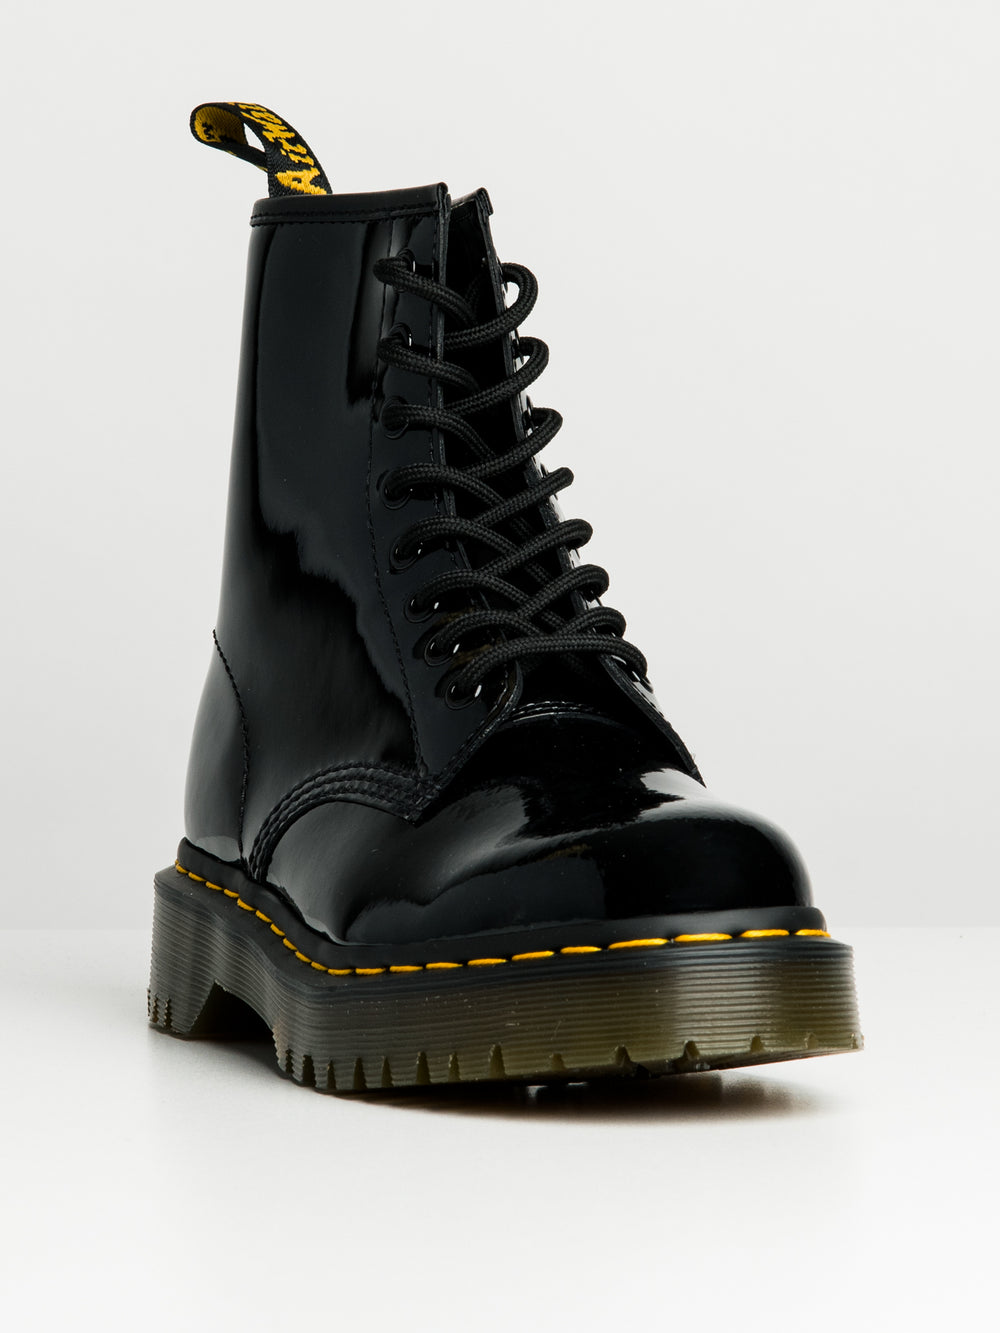 WOMENS DR MARTENS 1460 BEX PATENT BOOT - CLEARANCE